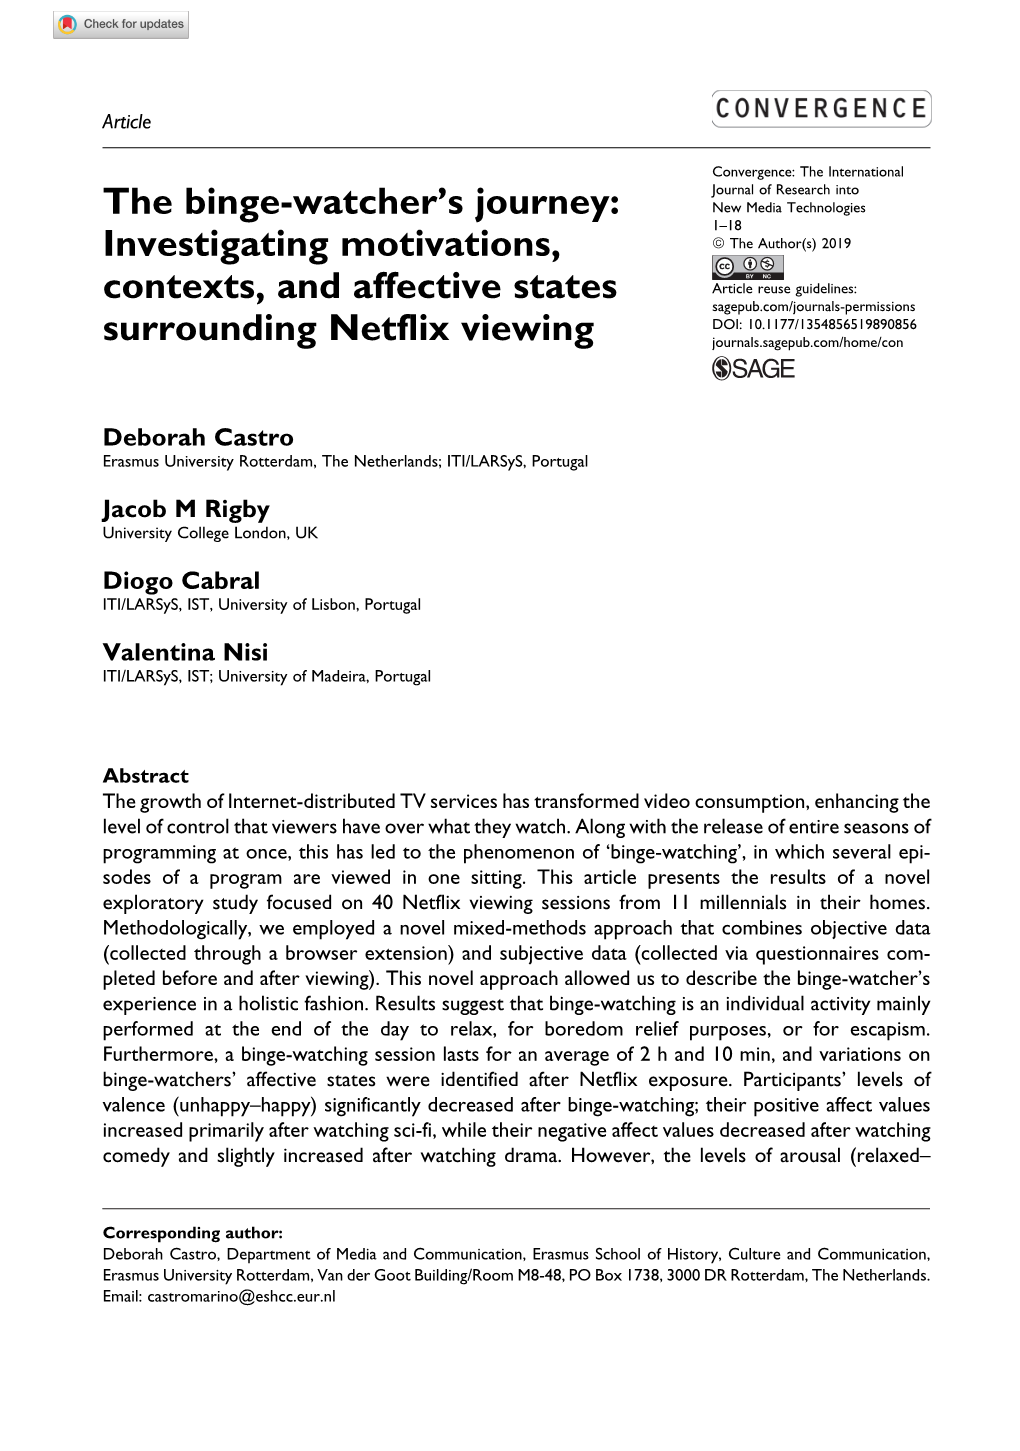 Investigating Motivations, Contexts, and Affective States Surrounding